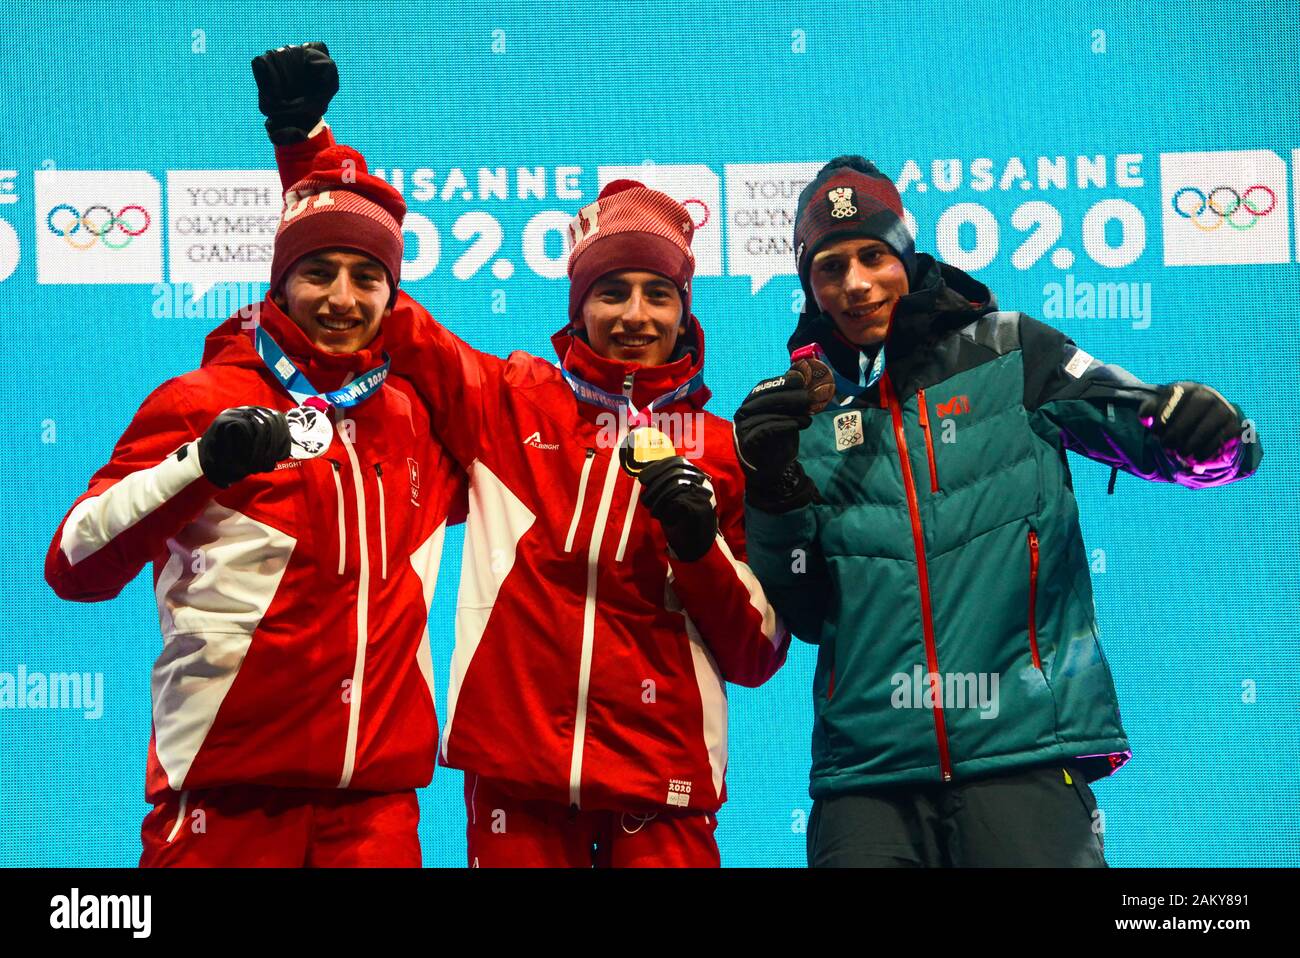 Lausanne, Switzerland. 10th Jan, 2020. The medalists in the Men's Individual Ski Mountaineering event in the 2020 Winter Youth Olympic Games in Lausnne Switzerland. Robin Bussard of Switzerland (left, silver medal), Thomas Bussard of Switzerland (center, gold medal) and Nils Oberauer of Austria Credit: Christopher Levy/ZUMA Wire/Alamy Live News Stock Photo